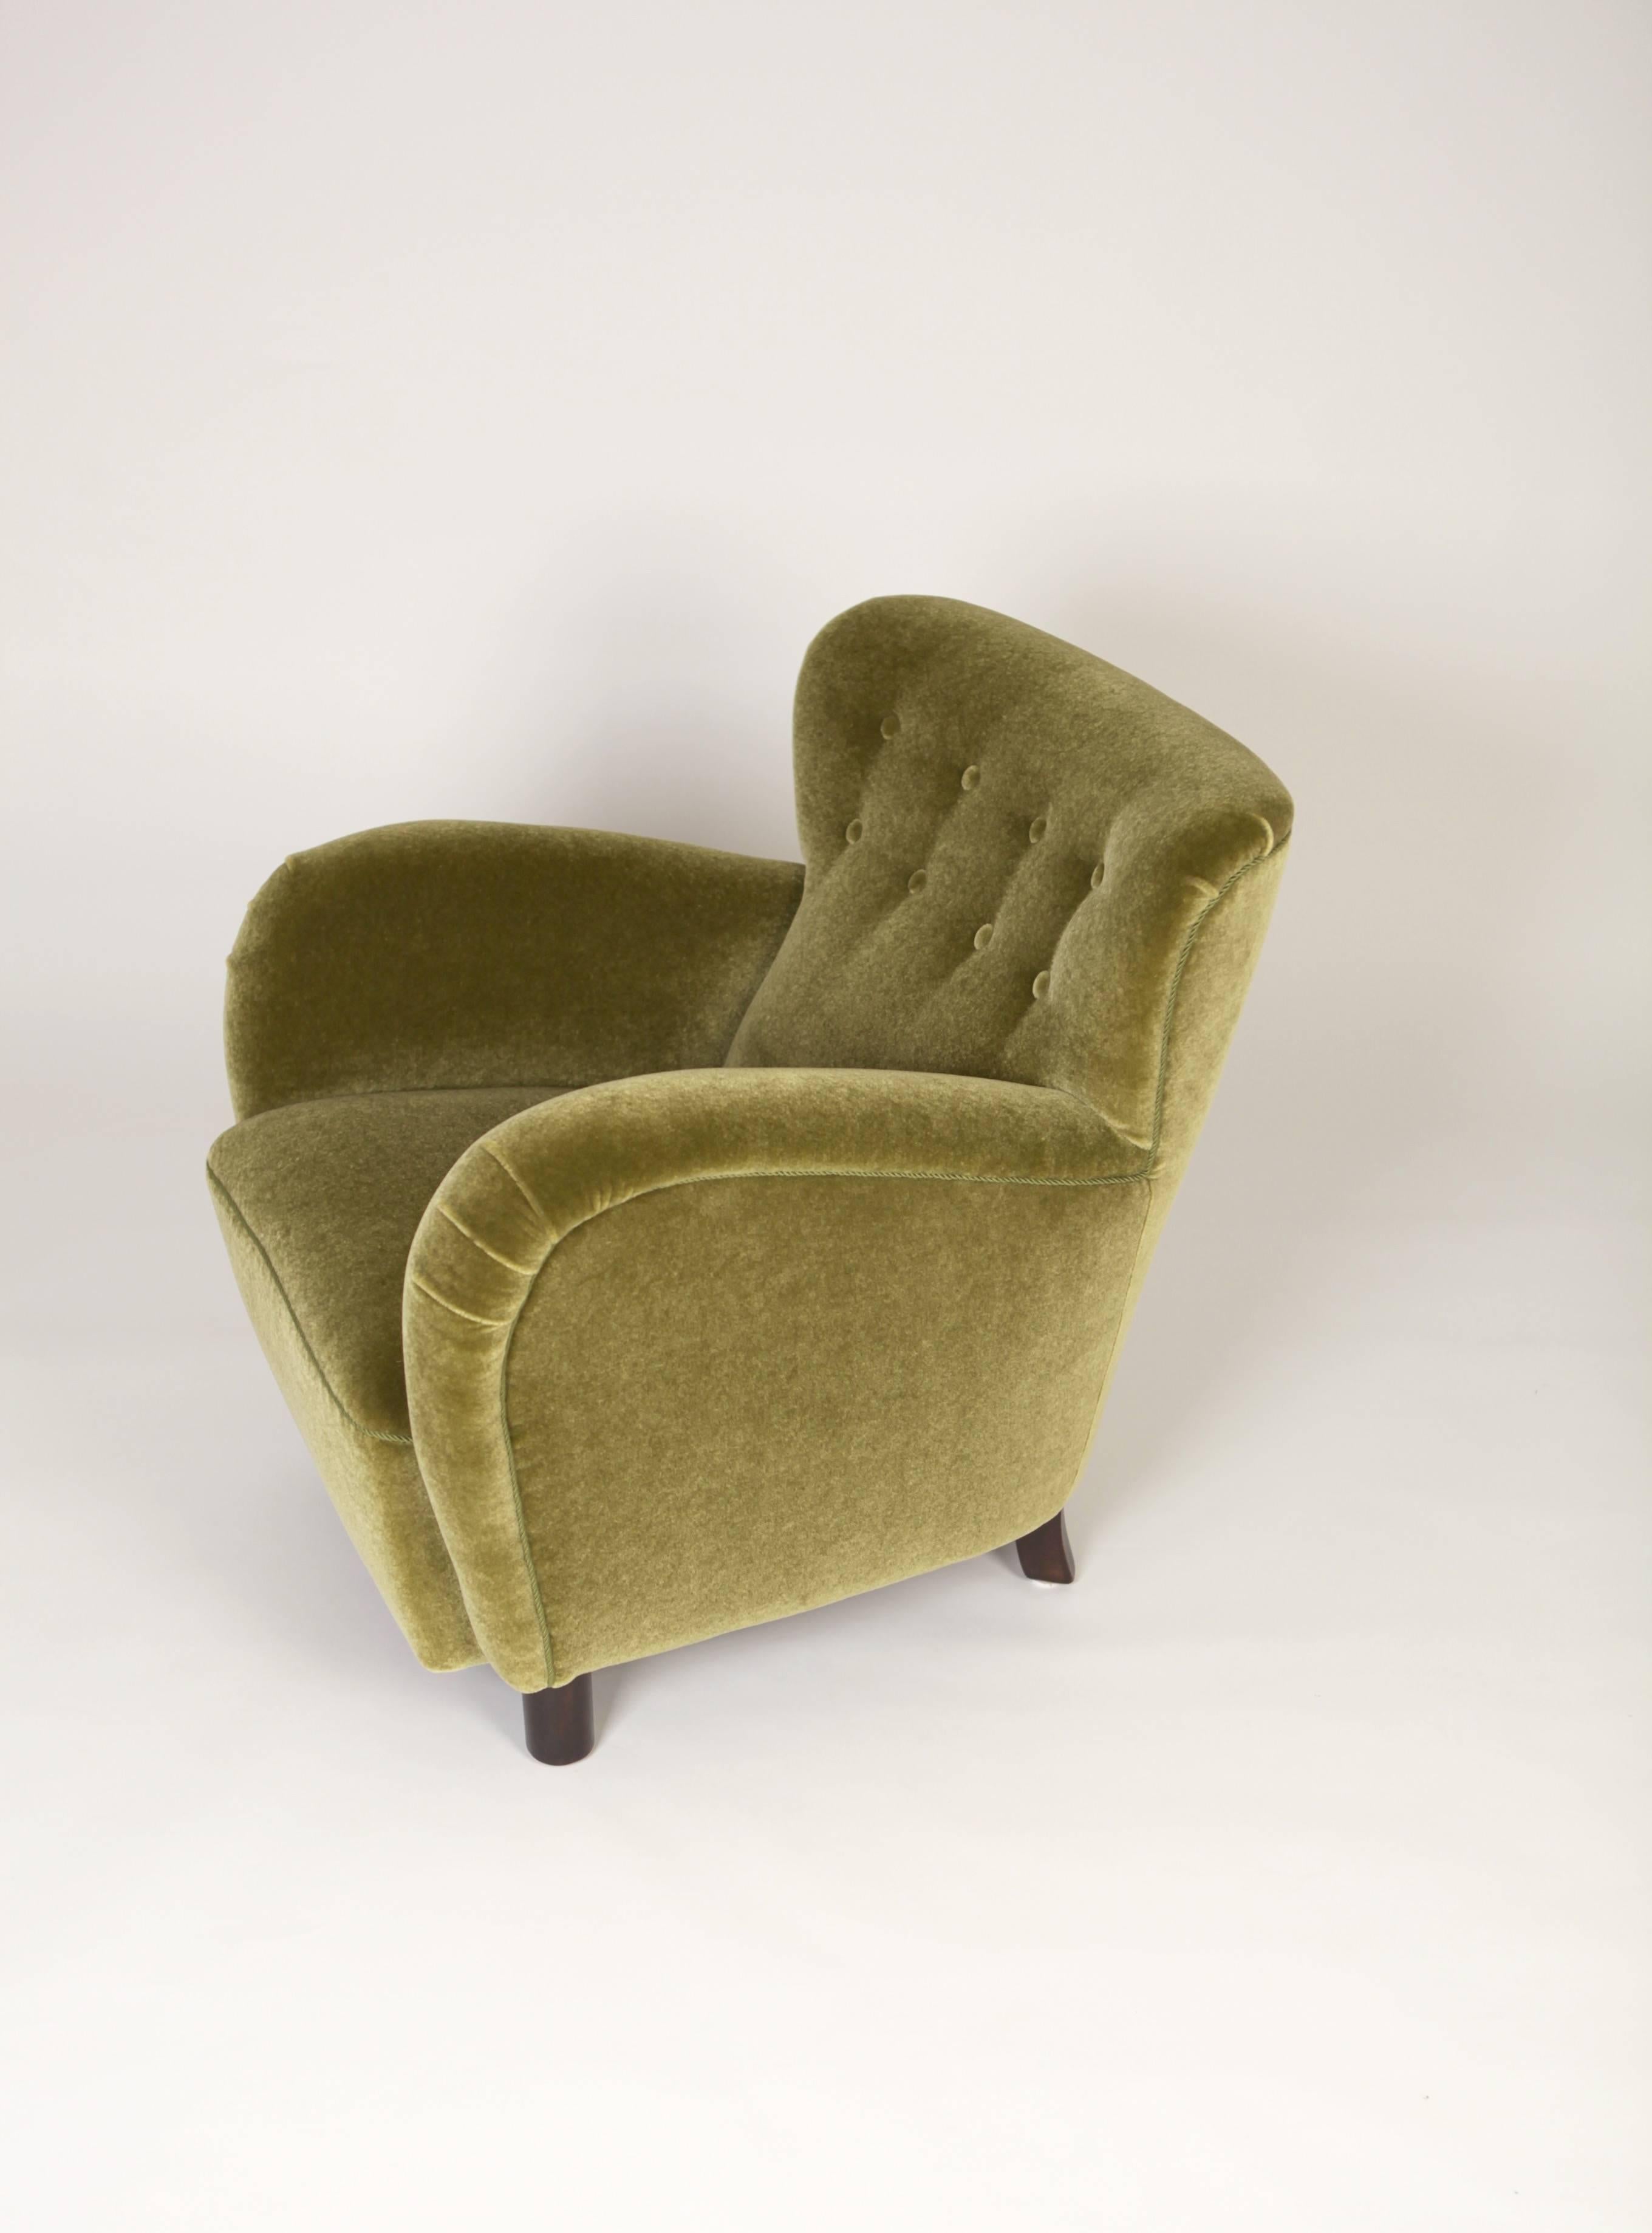 Stained Flemming Lassen, attributed Armchair, Denmark, 1930s-1940s